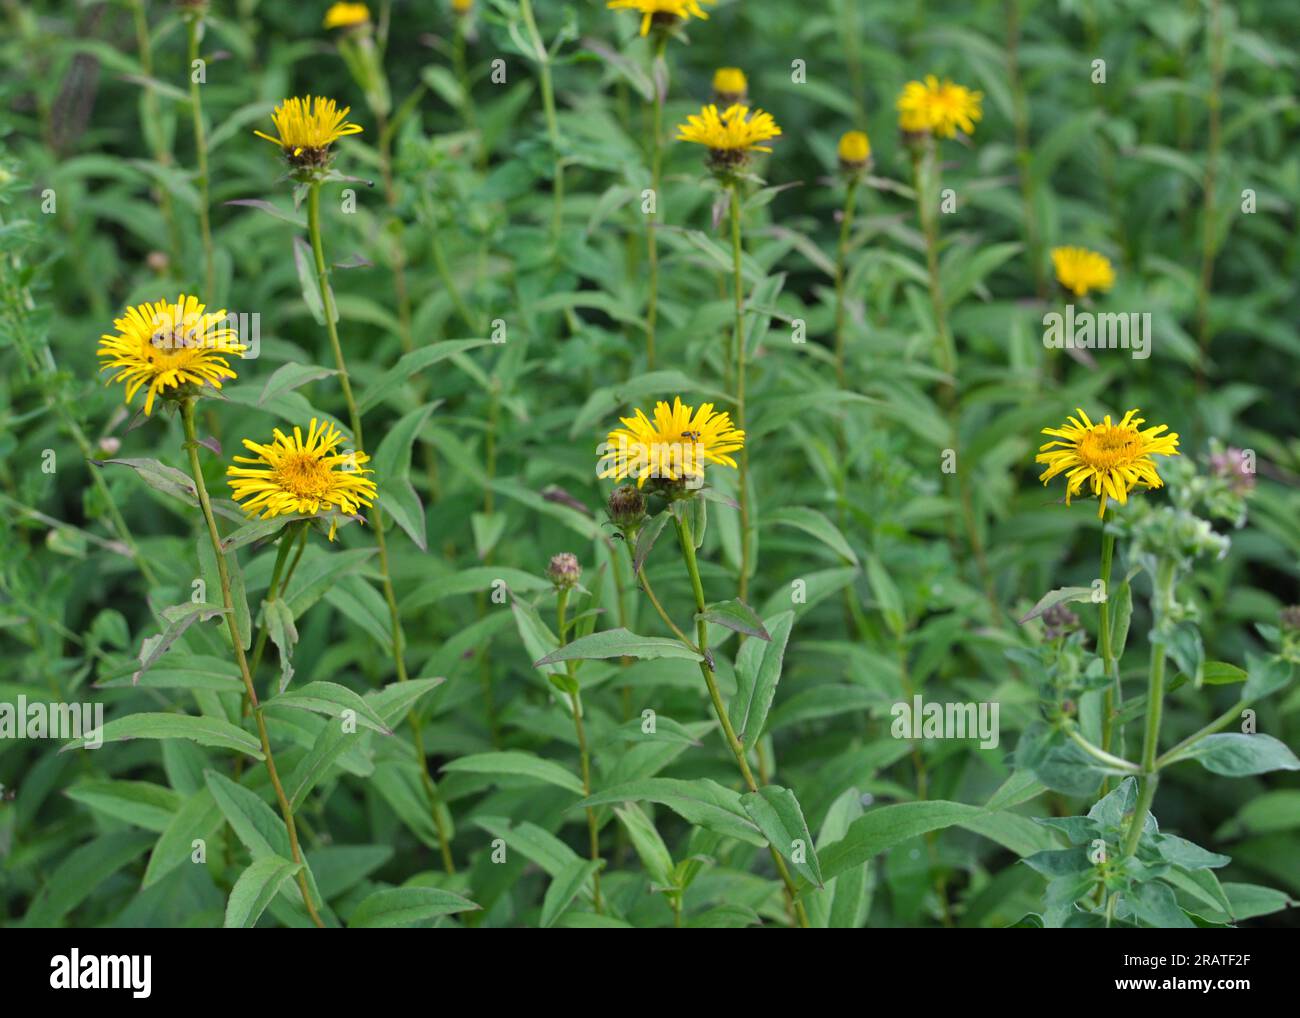 Pentanema from the aster family blooms in the wild Stock Photo